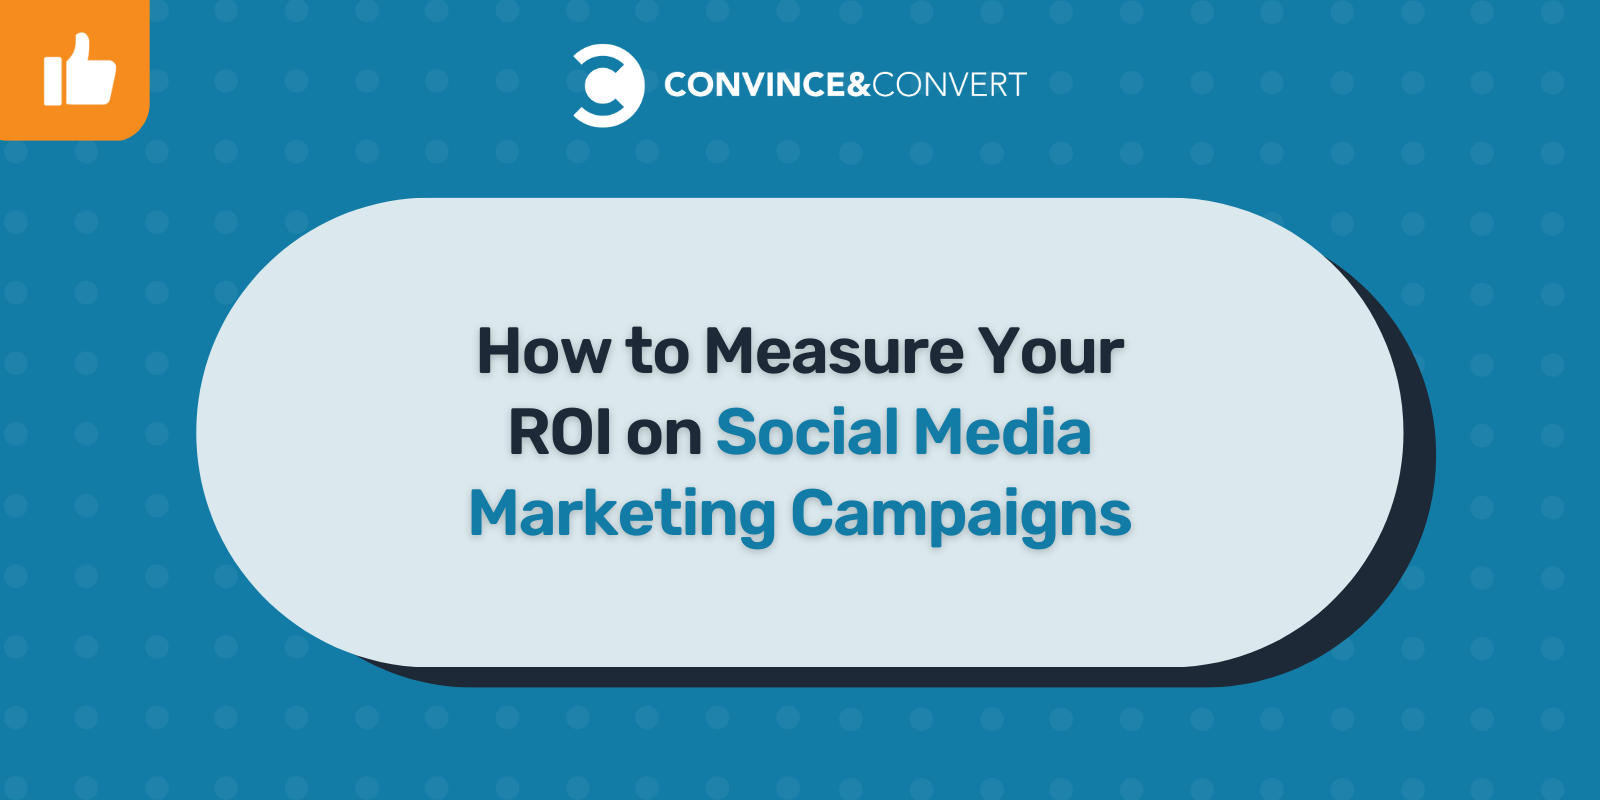 How to Measure Your ROI on Social Media Marketing Campaigns